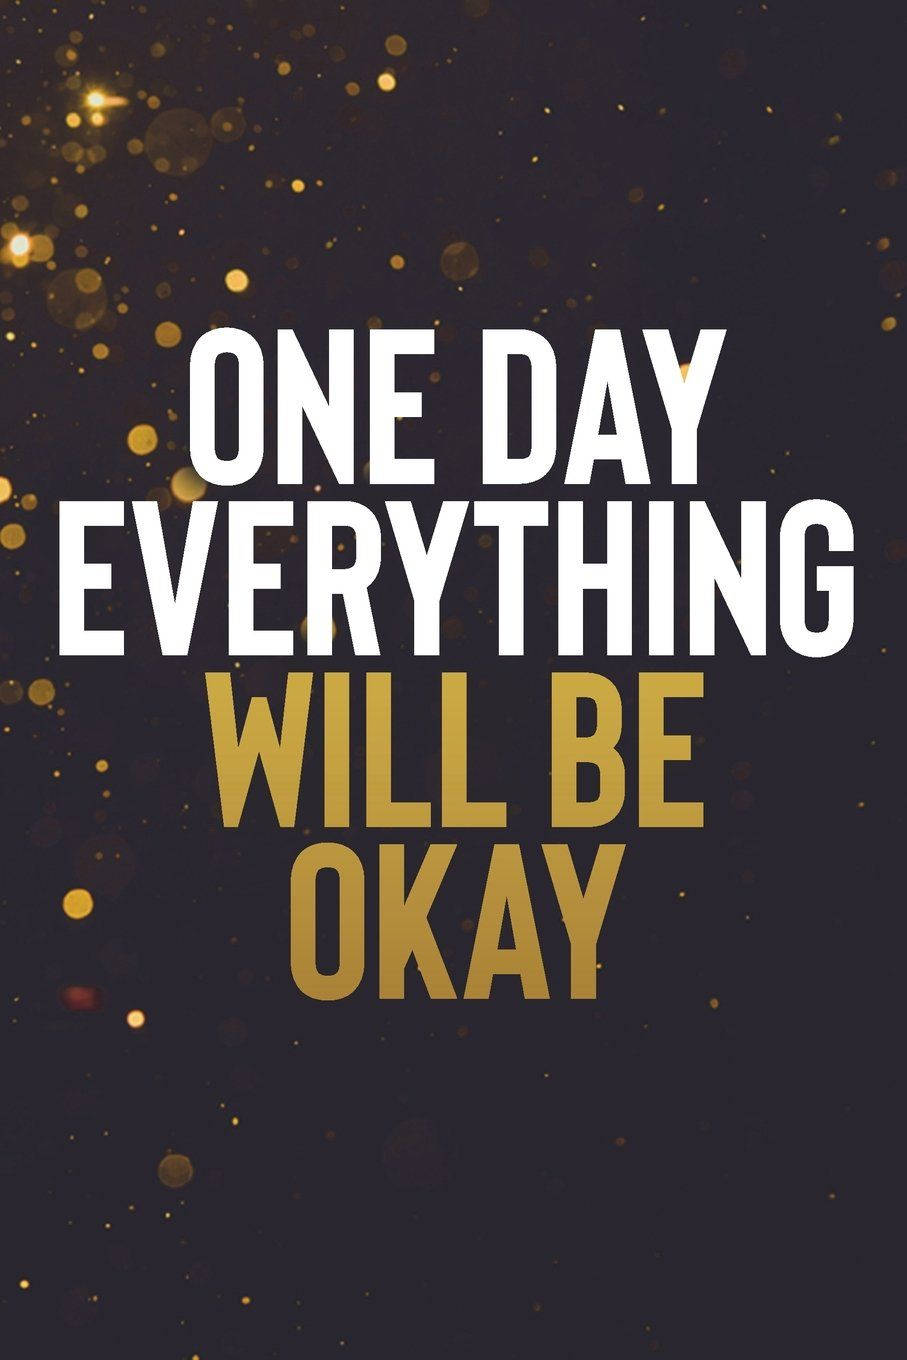 Download One Day Everything Will Be Okay Wallpaper 